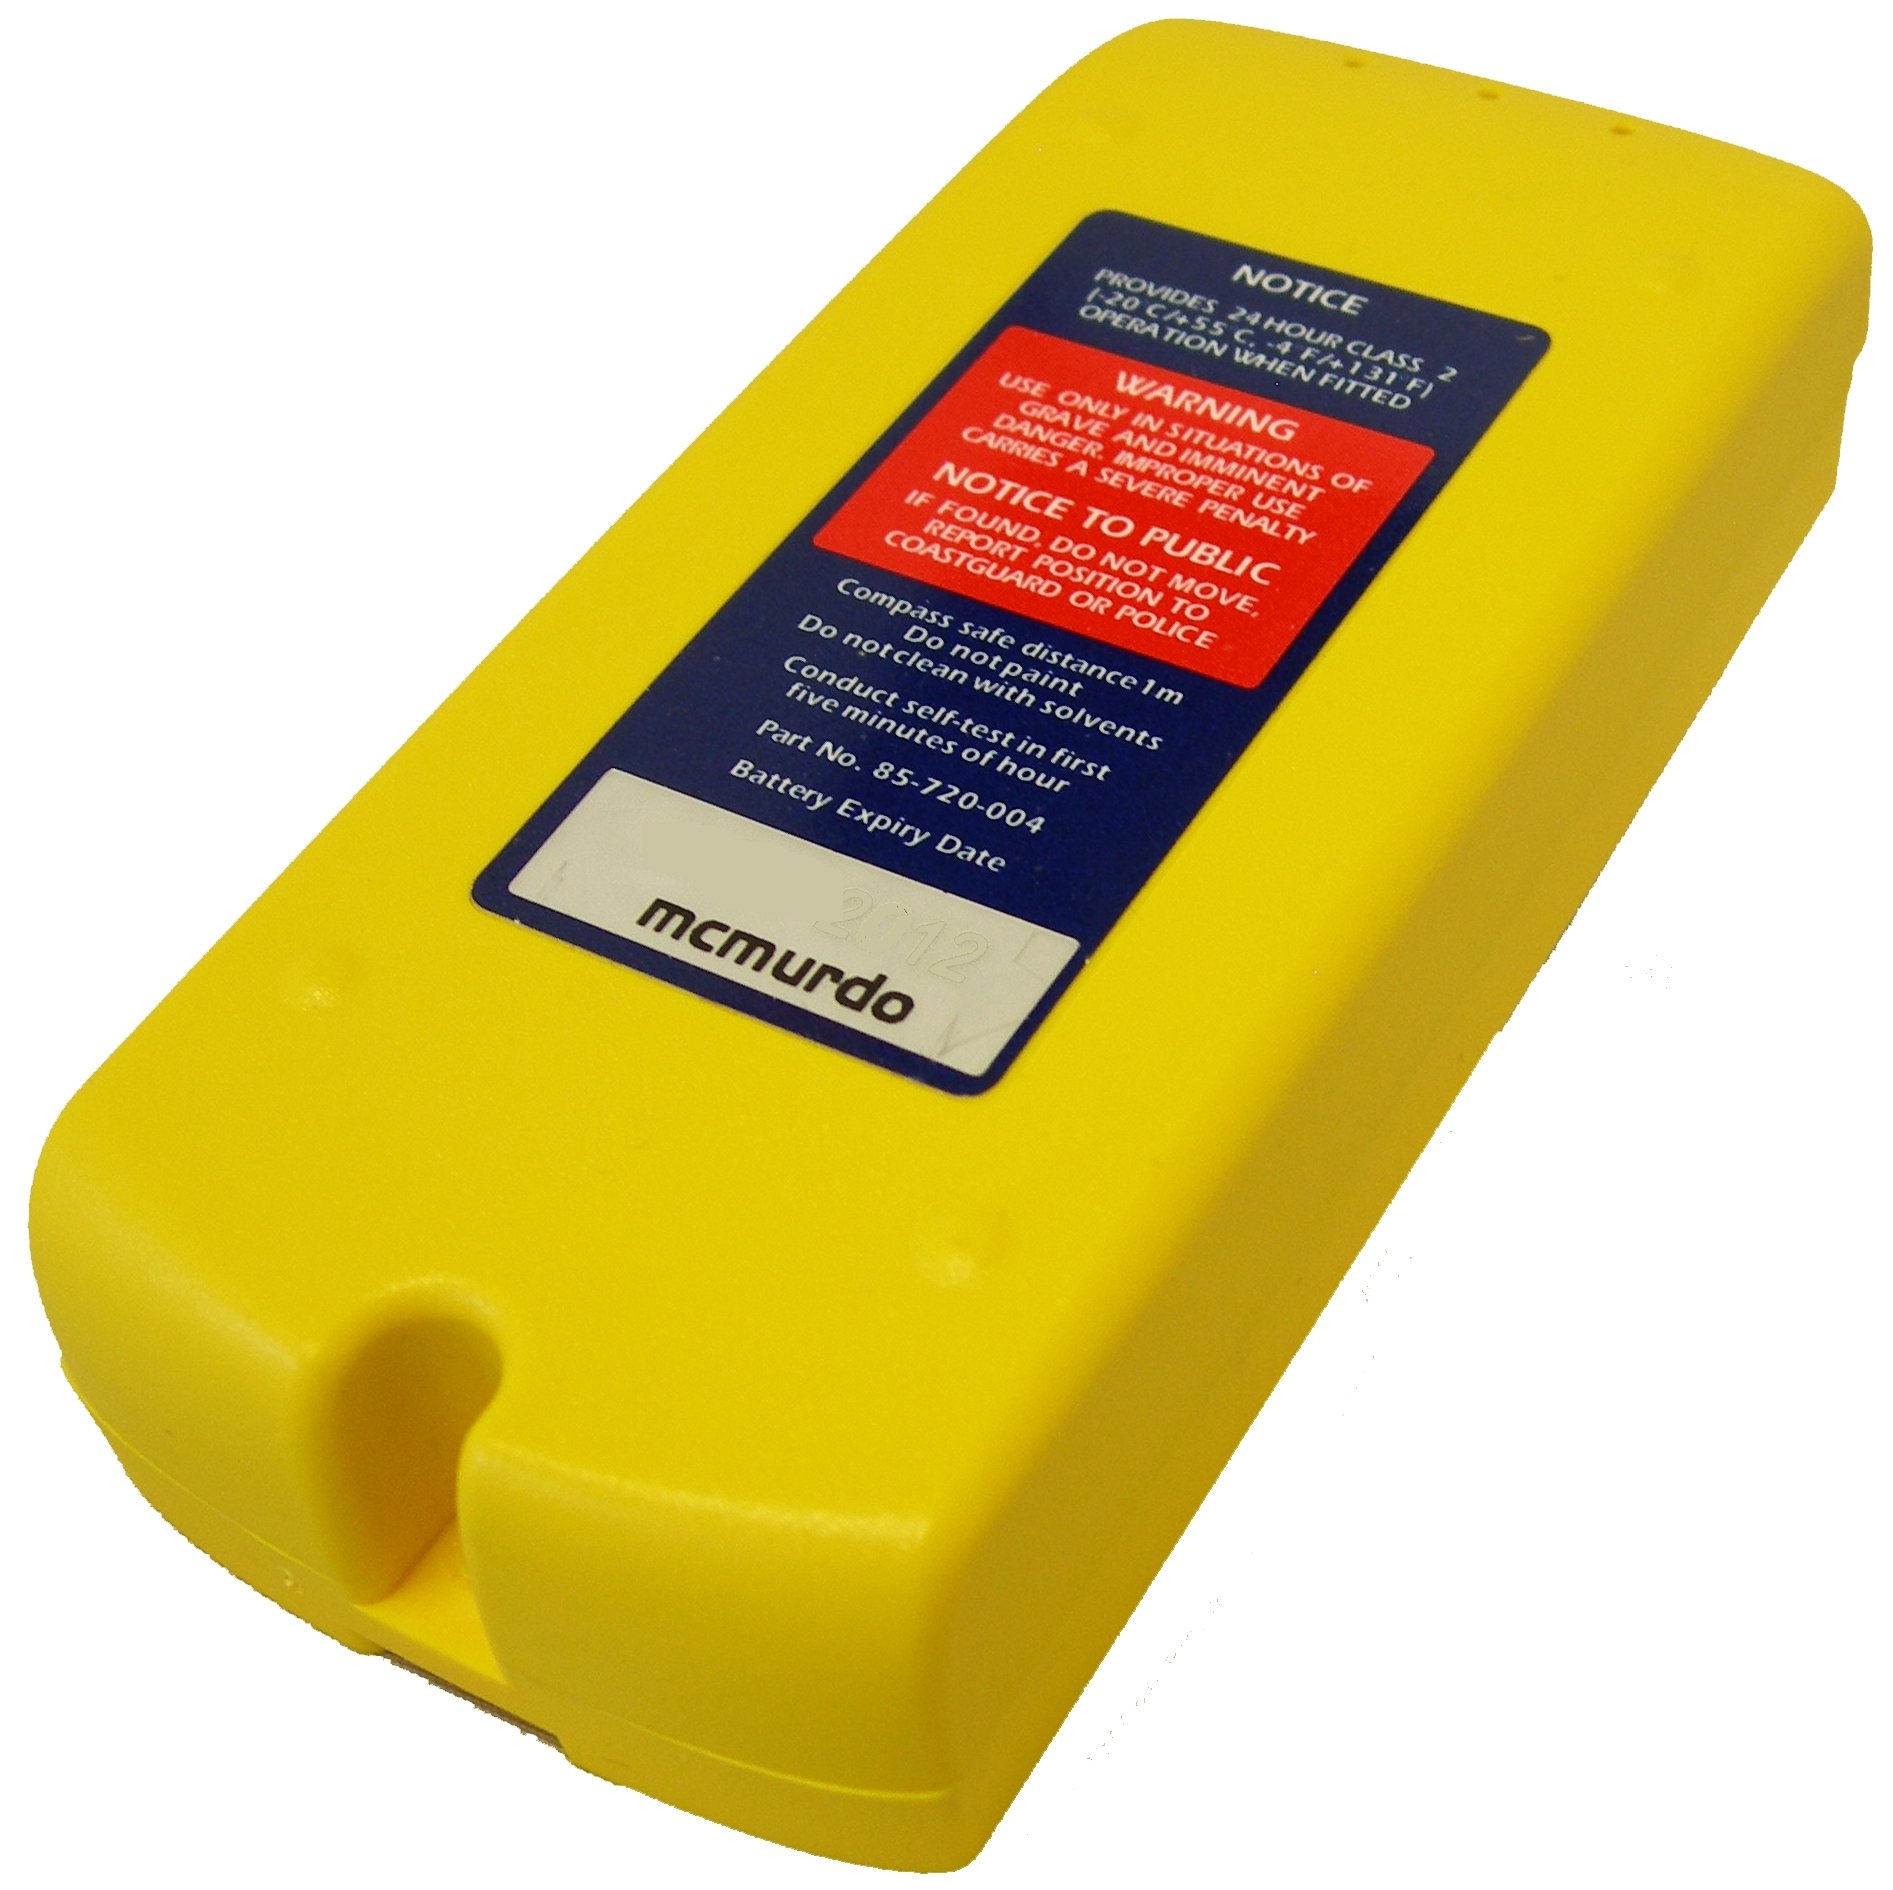 McMurdo FastFind Plus / MAX / MAX G PLB User Replaceable Battery